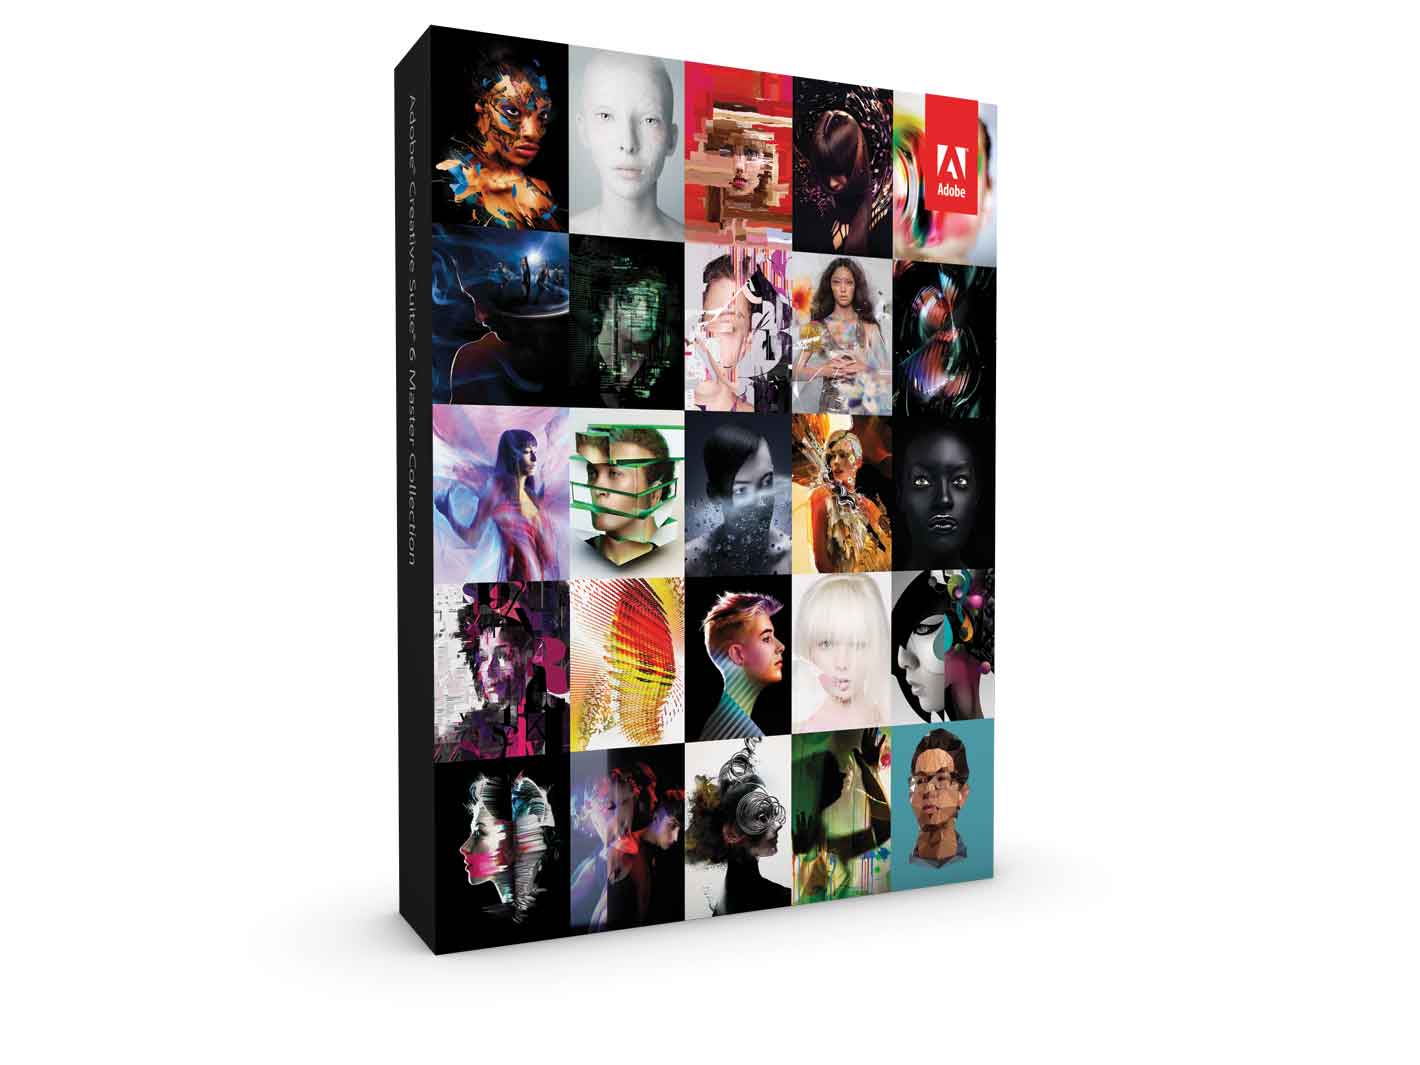 Download Adobe Master Collection Cs6 Full Crack For Mac